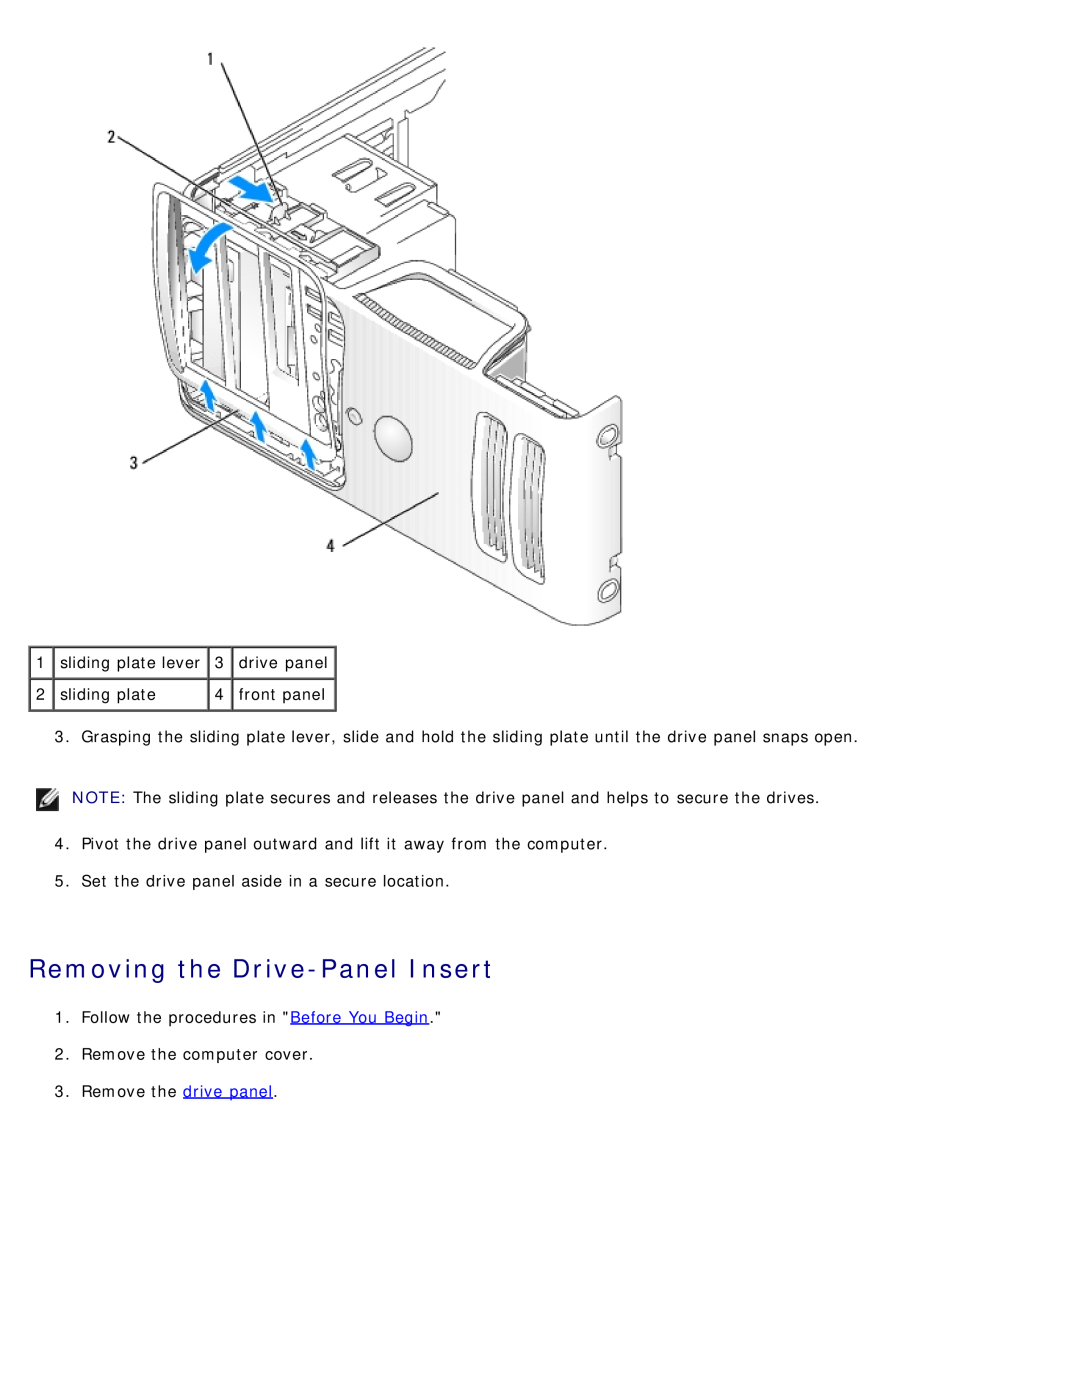 Dell DCSM manual Removing the Drive-Panel Insert, drive panel, front panel 